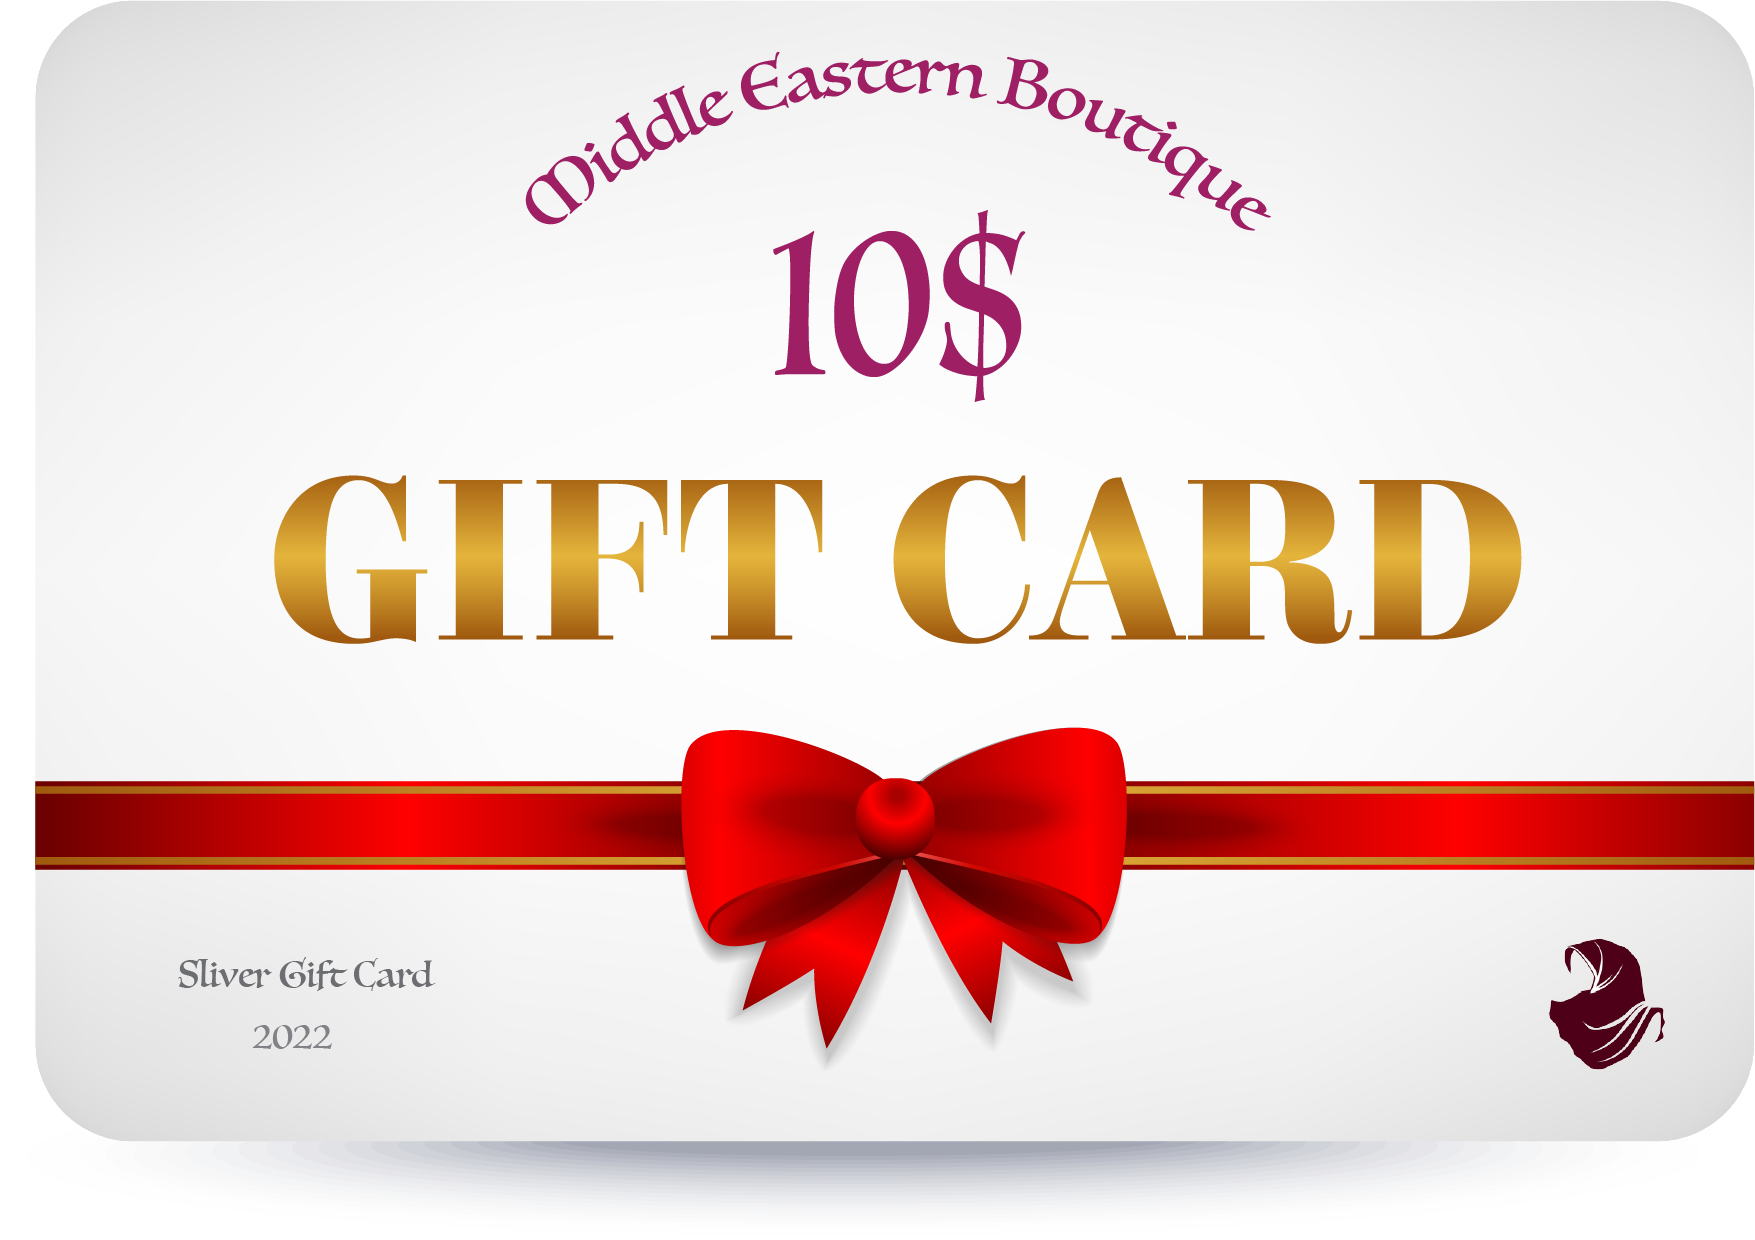 Gold Gift Card Middle Eastern Boutique